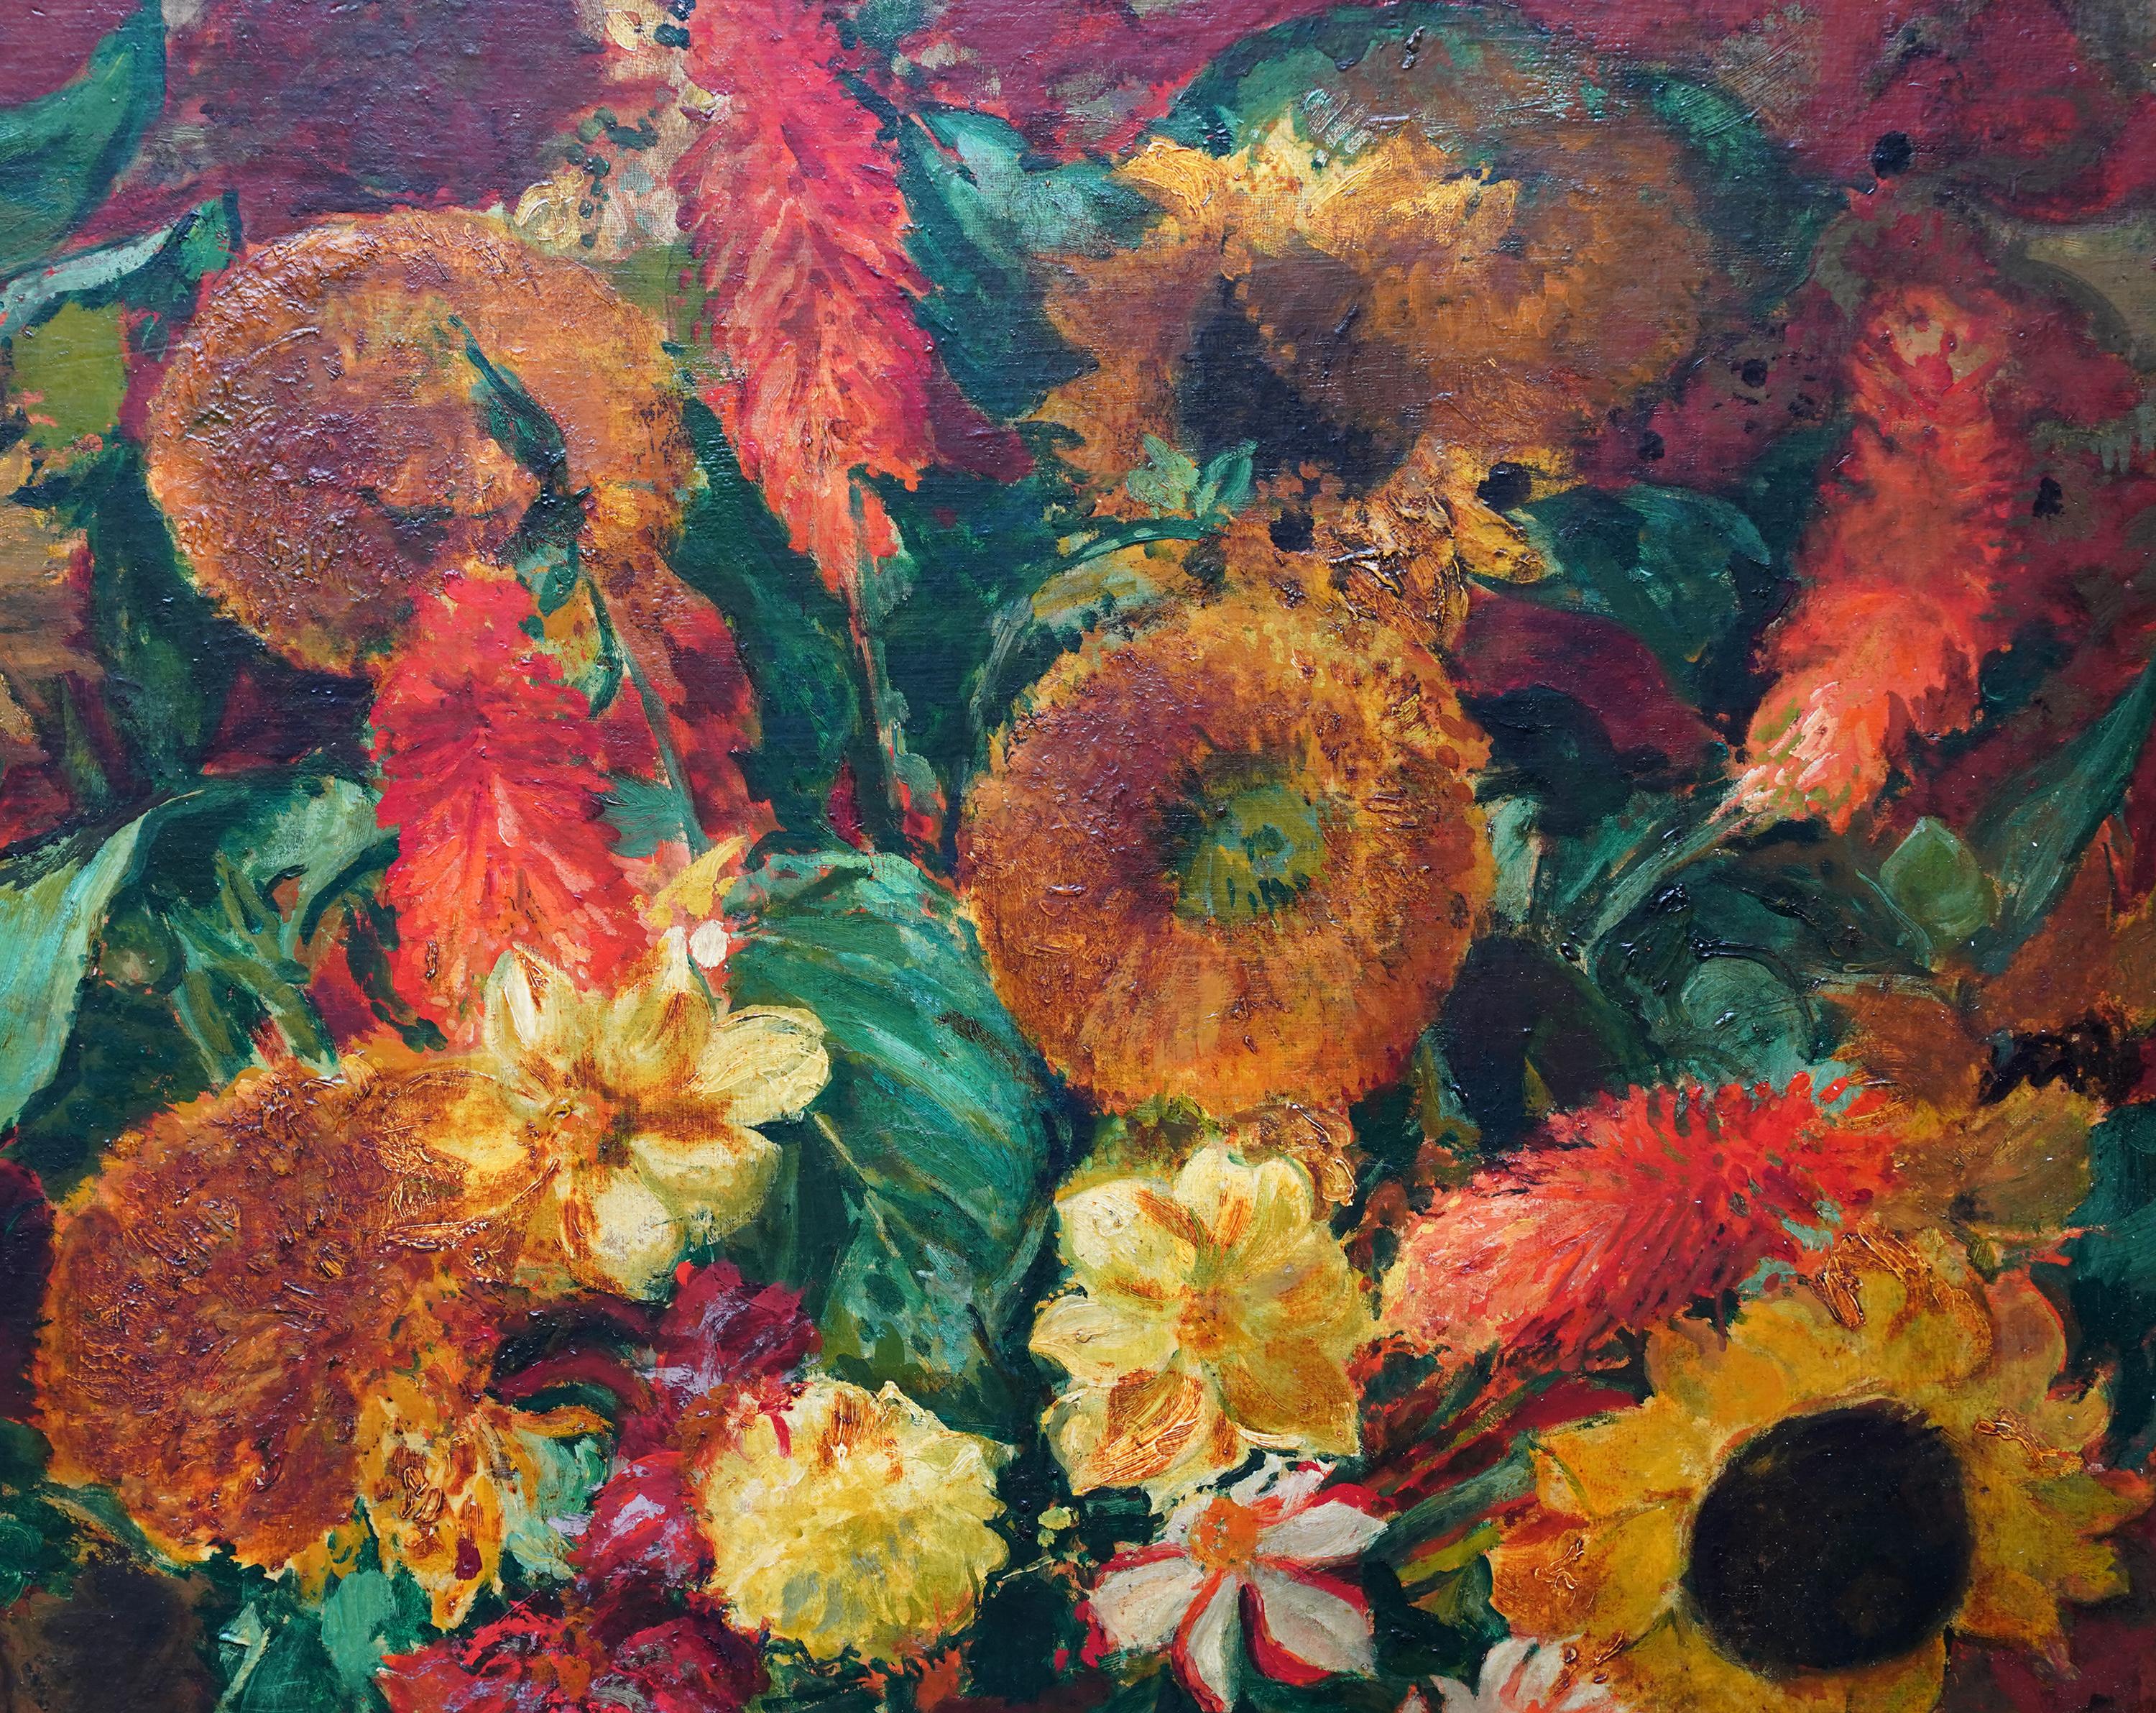 This vibrant French Art Deco floral oil painting is by noted French artist Jacques Emile Blanche. Painted circa 1930, the palette is of wonderful tones of yellow and orange with splashes of green and typical Blanche heavy impasto.  The composition